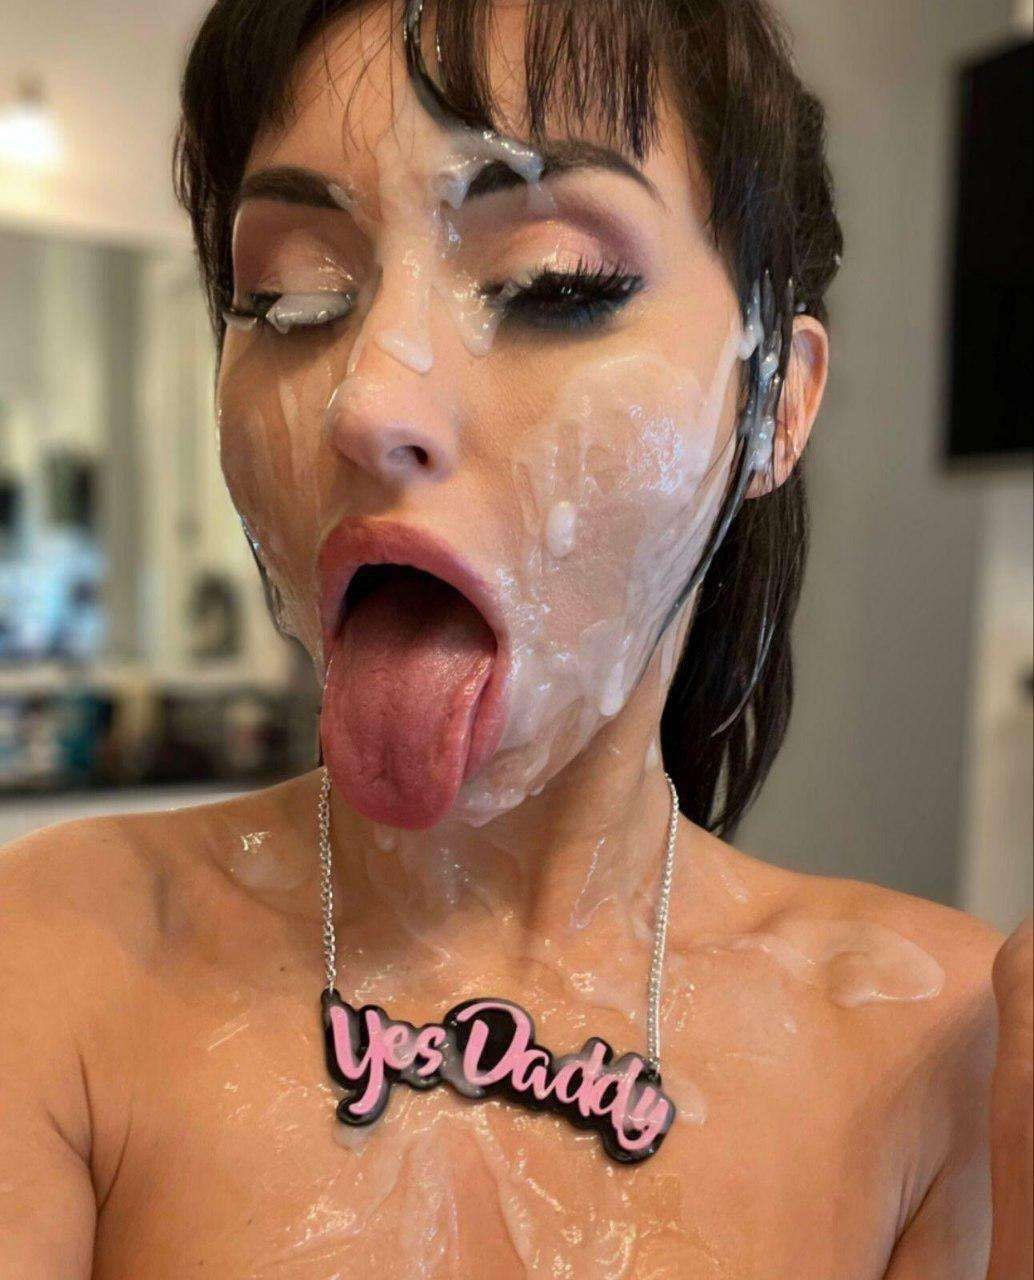 Watch the Photo by Ruinedcarpet with the username @Ruinedcarpet, posted on November 28, 2023. The post is about the topic Cum Sluts. and the text says '#Cum #Cute #Babe #Porn #Sex #Hot #Thot #Milk #Tongue #CumSlut #Cutie #Sperm #Semen #Cumshot #Facial #Hottie #Cuteness #Selfie'